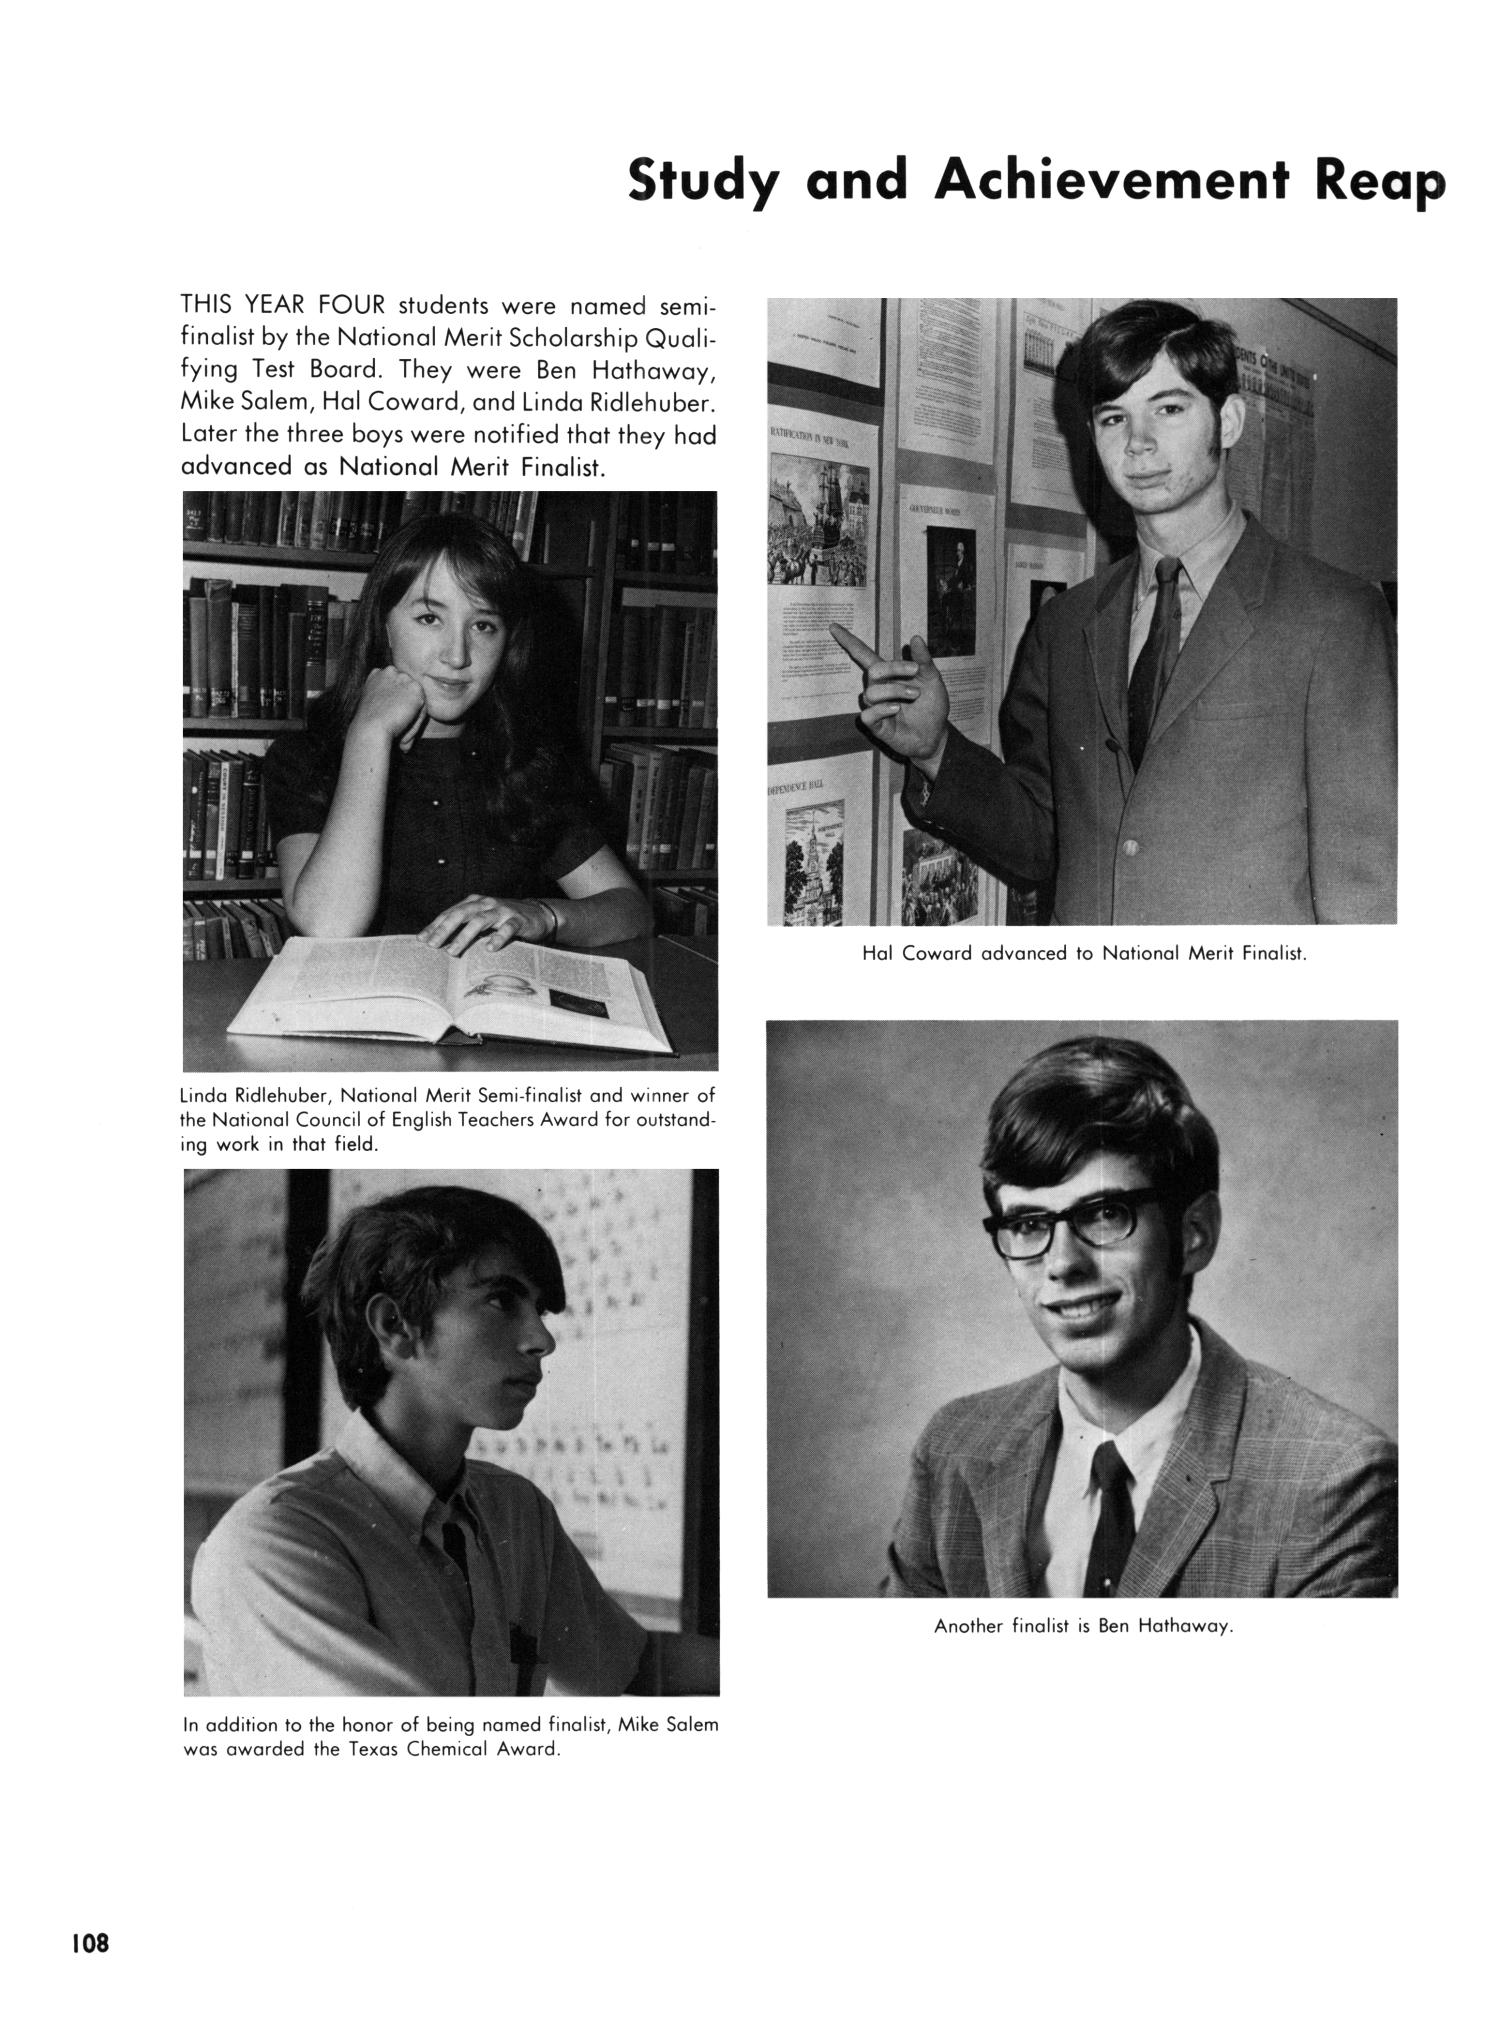 The Yellow Jacket, Yearbook of Thomas Jefferson High School, 1970
                                                
                                                    108
                                                